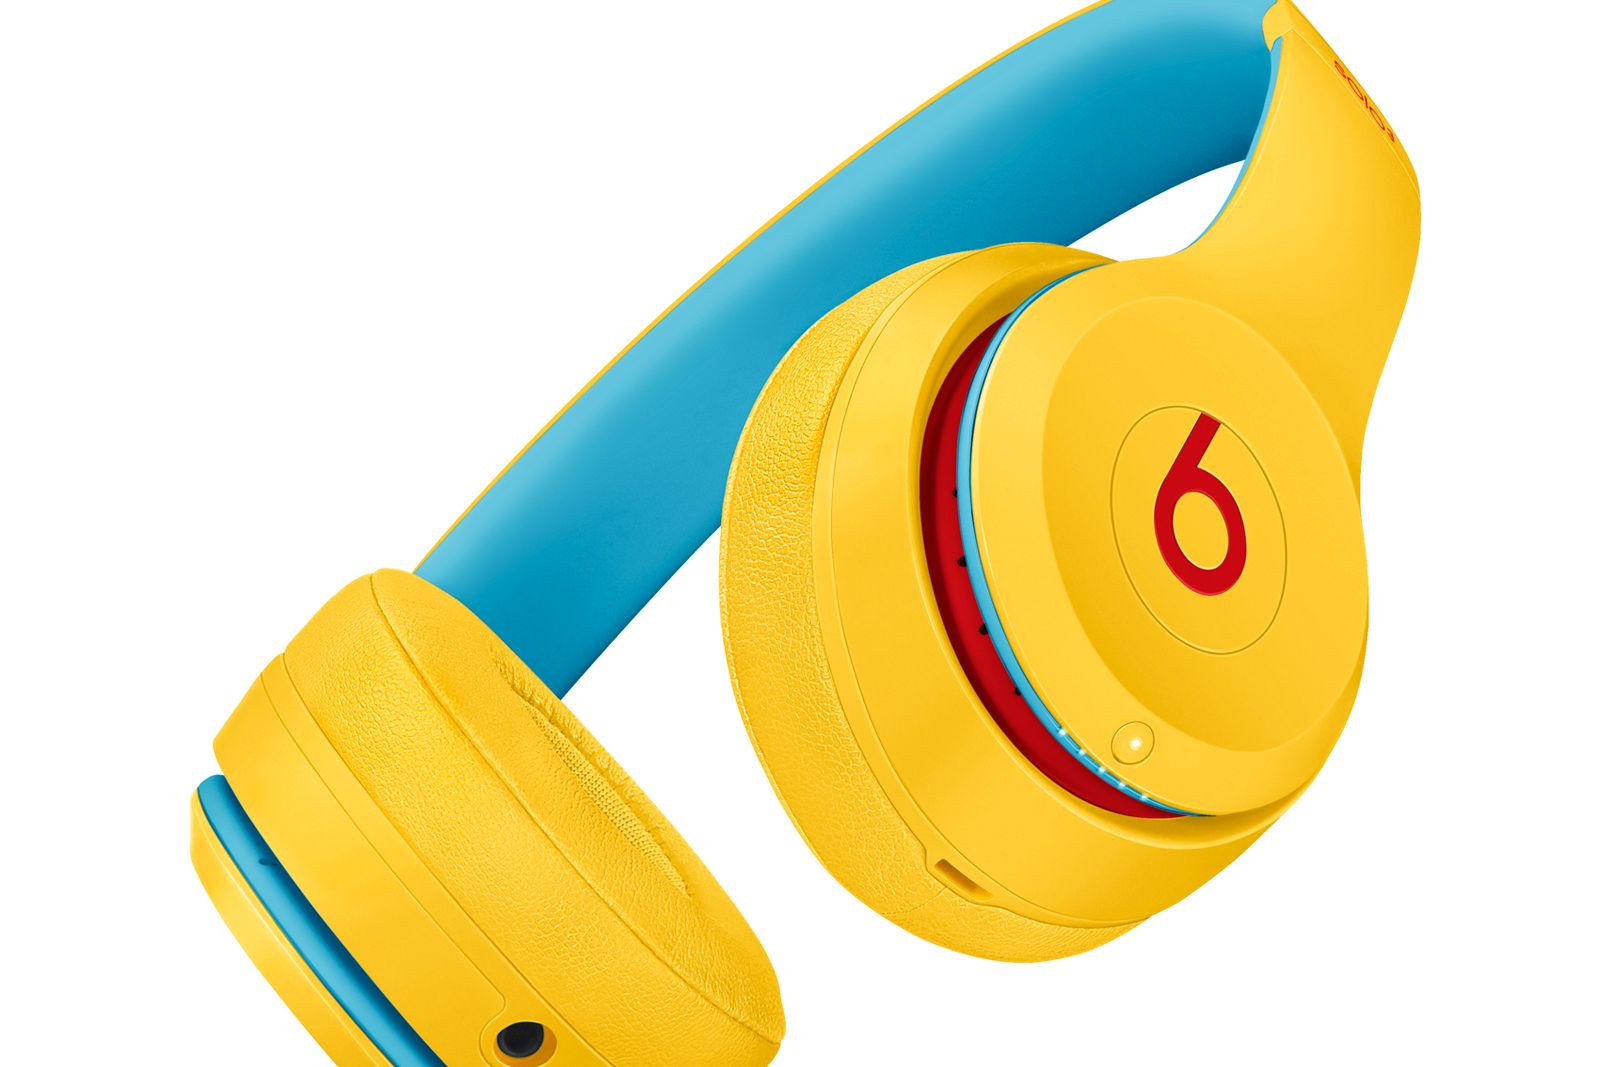 Check out this bright yellow version of the Beats Solo 3 wireless